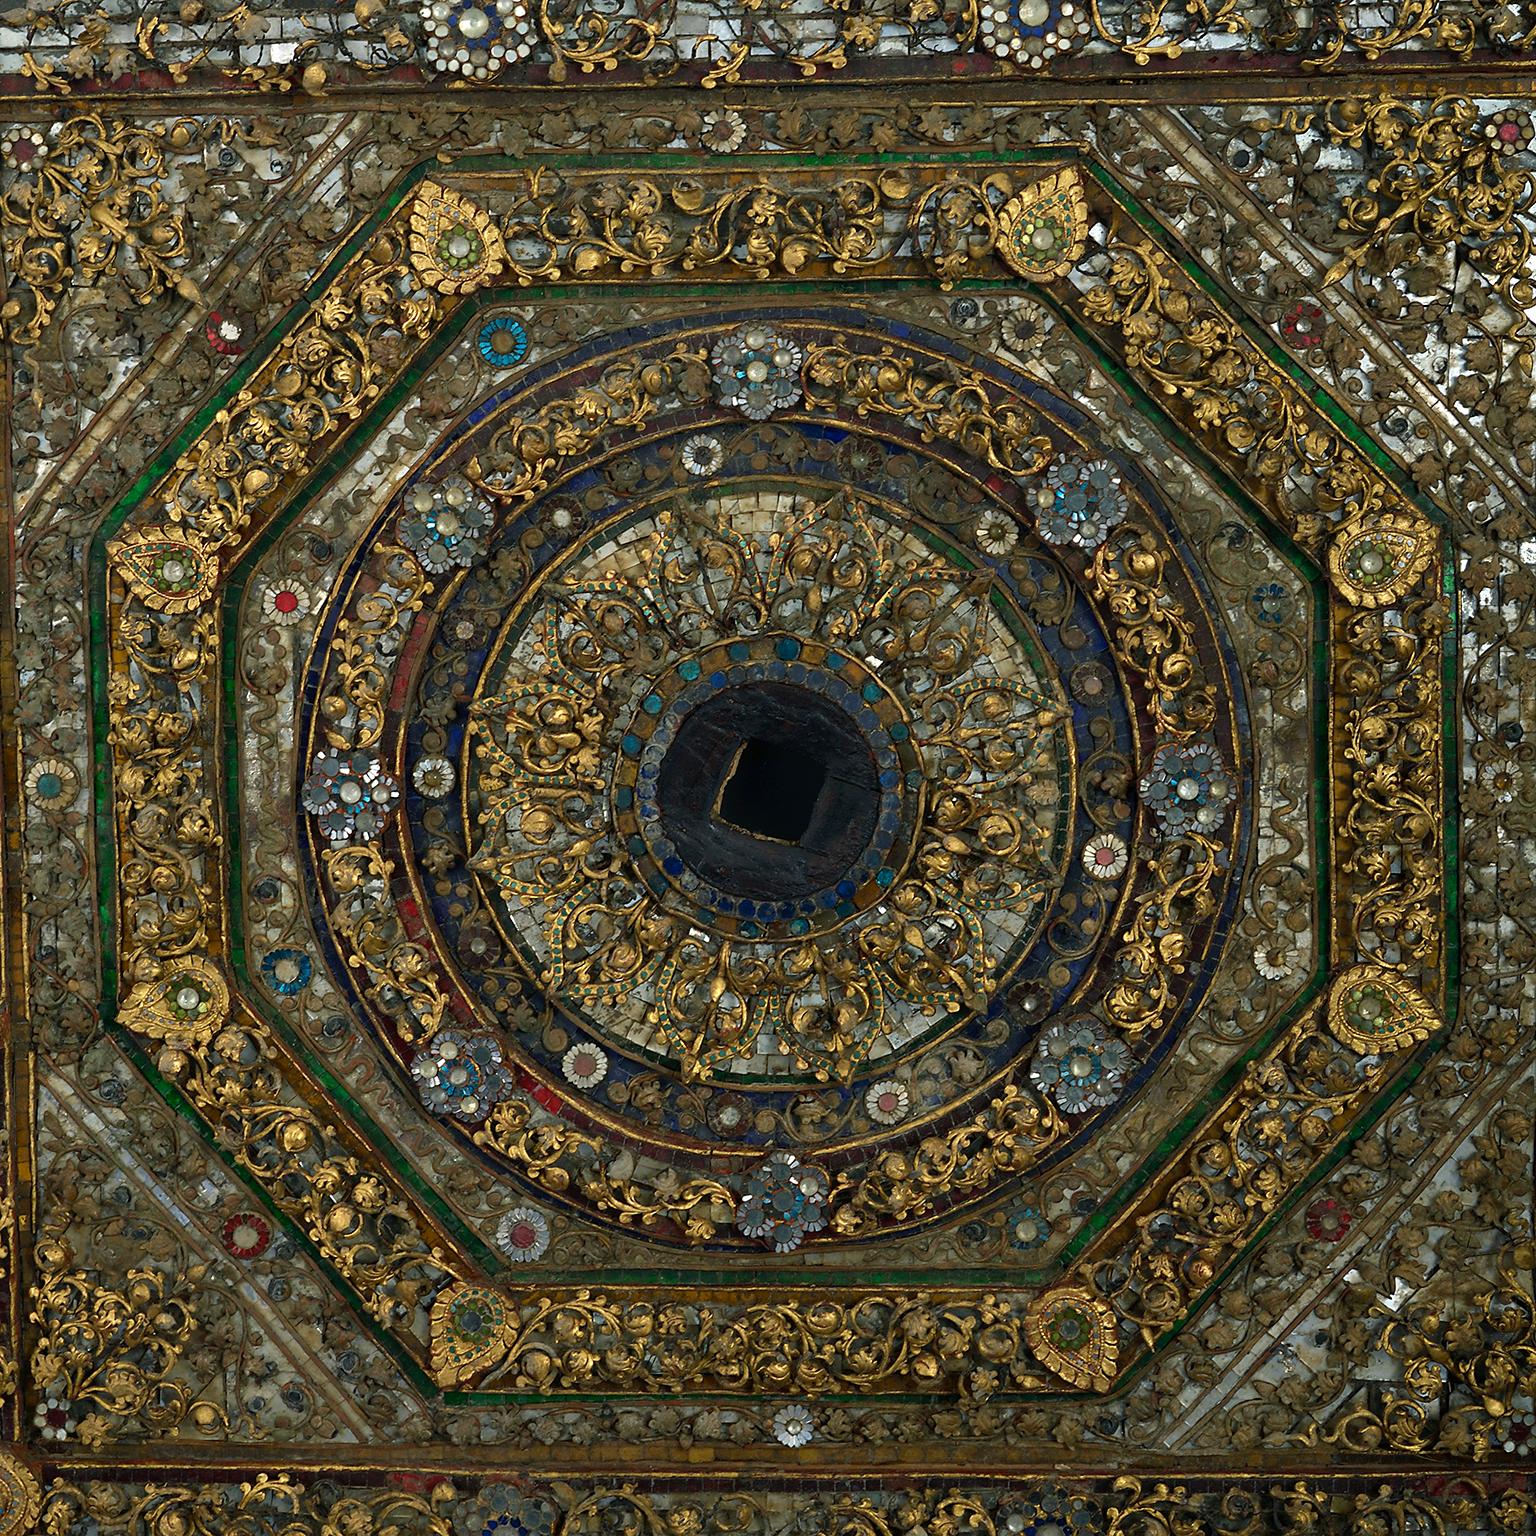 A 19th century large and very decorative panel, probably originally the central panel of an elaborate ceiling in a temple or bell house. Formed of intricately designed pieces of wire work, mozaic mirror, colored glass and gem stones. This decorative